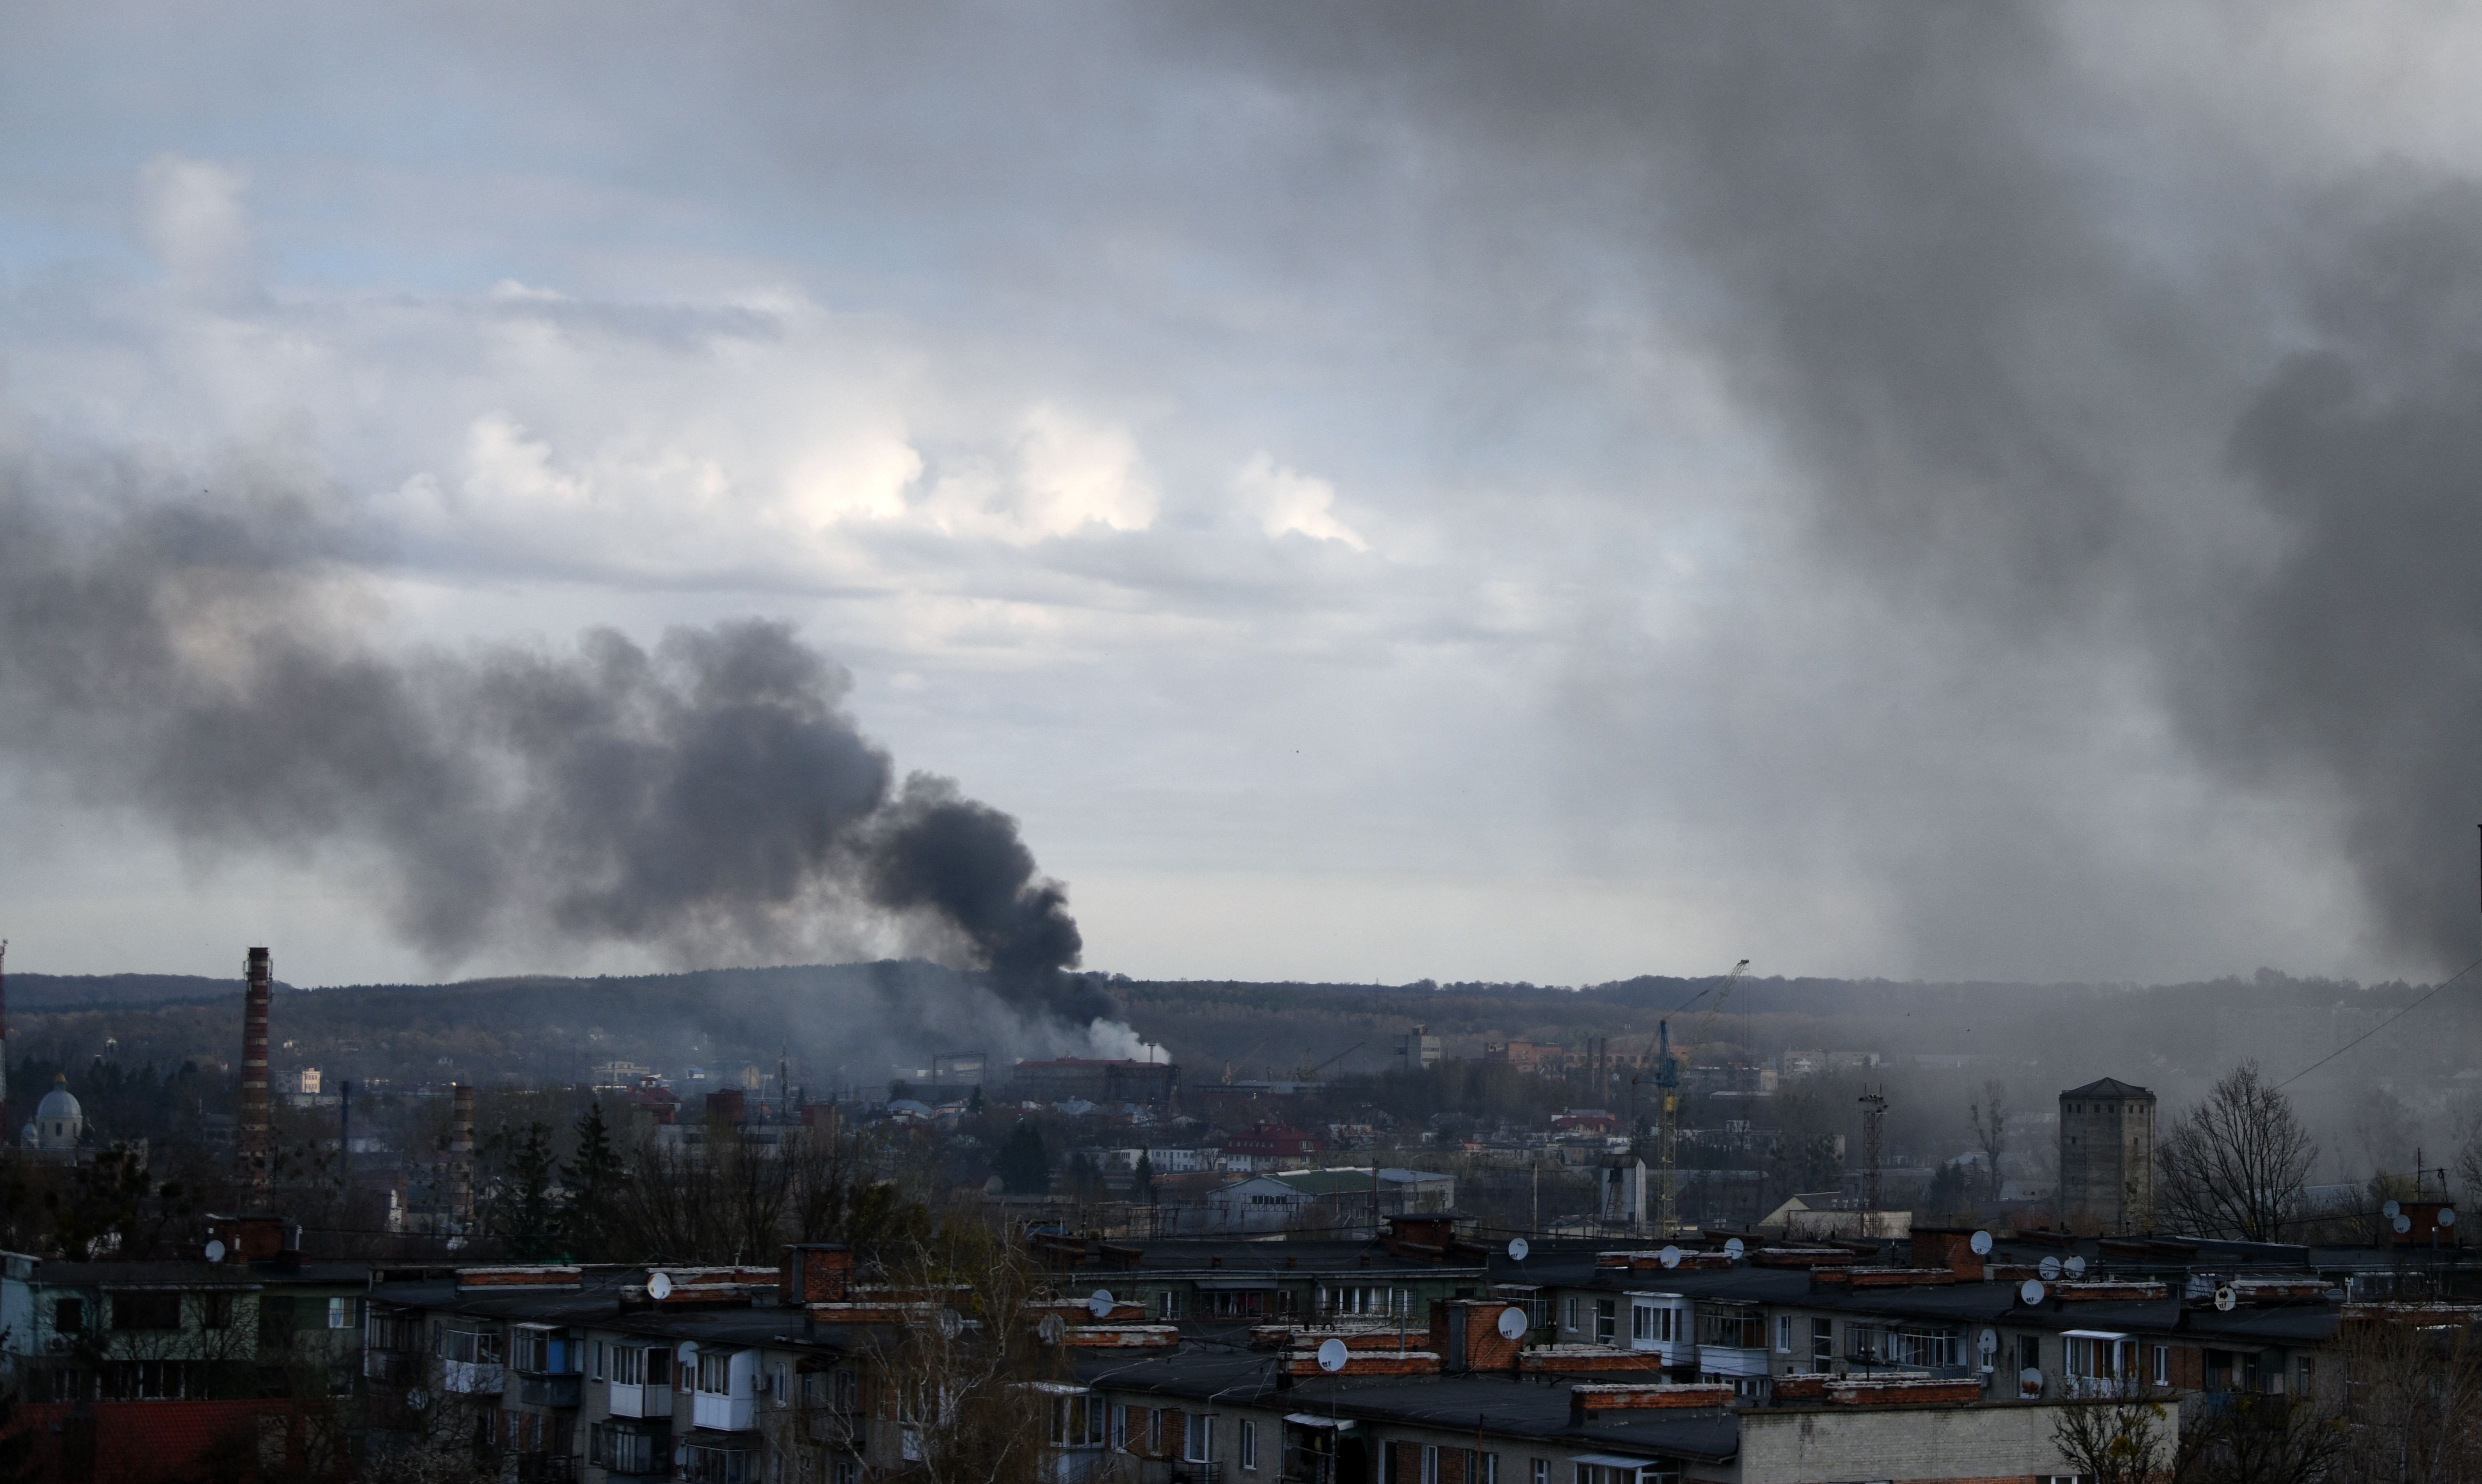 Explosions in Lviv in Western Ukraine Injure at Least 4 - The New